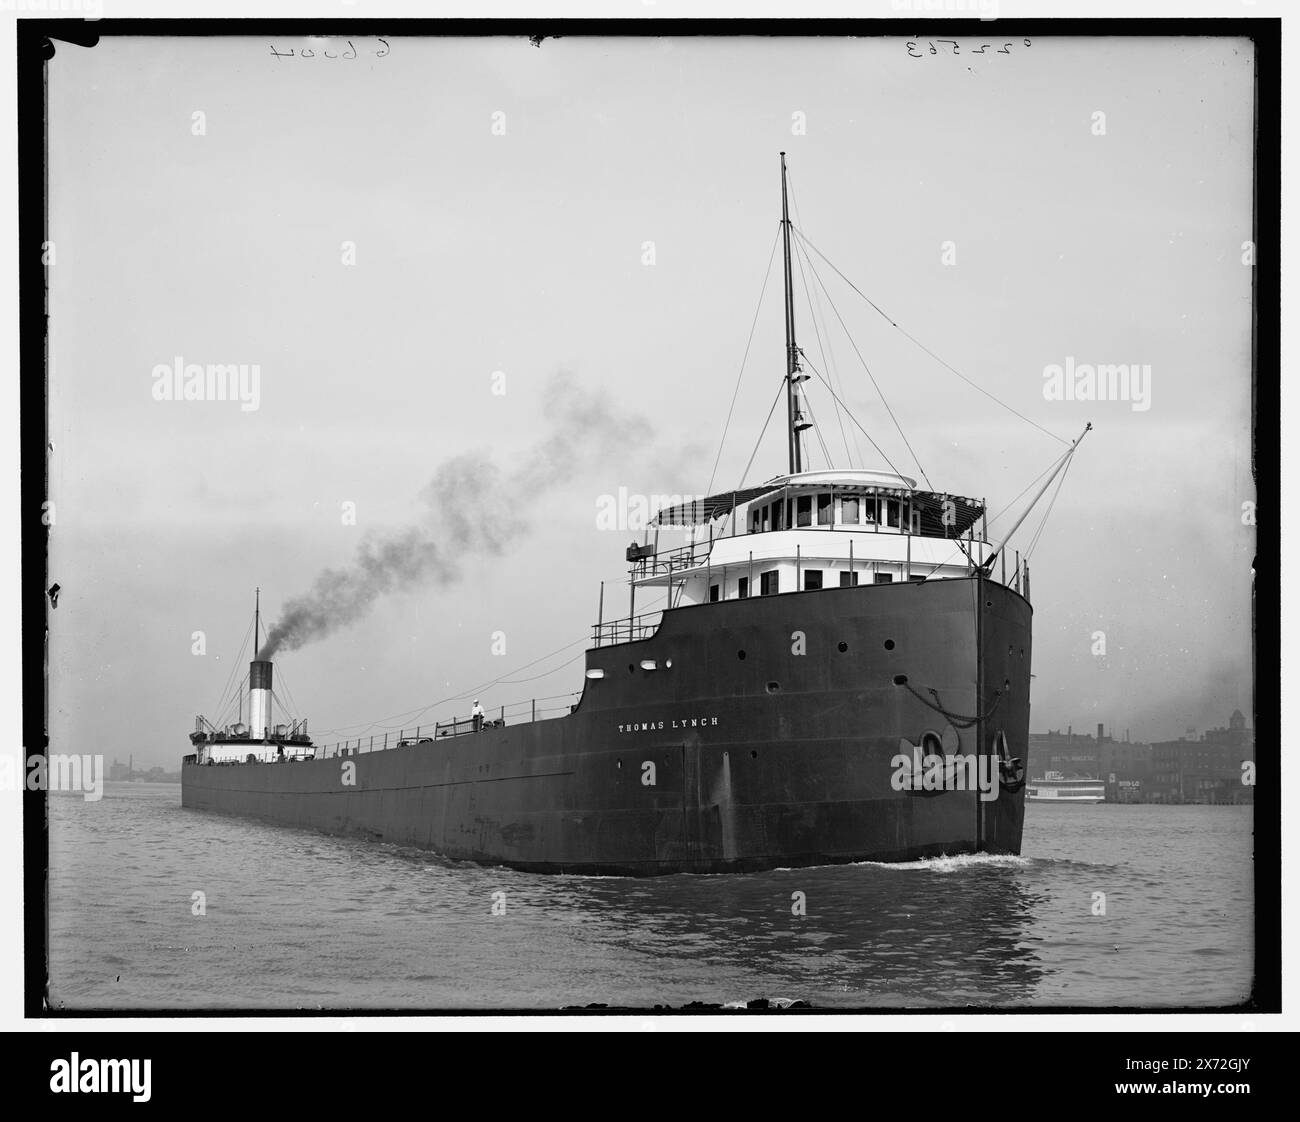 Steamer Thomas Lynch, 'G 6004' on negative., Detroit Publishing Co. no. 022563., Gift; State Historical Society of Colorado; 1949,  Thomas Lynch (Freighter) , Cargo ships. Stock Photo